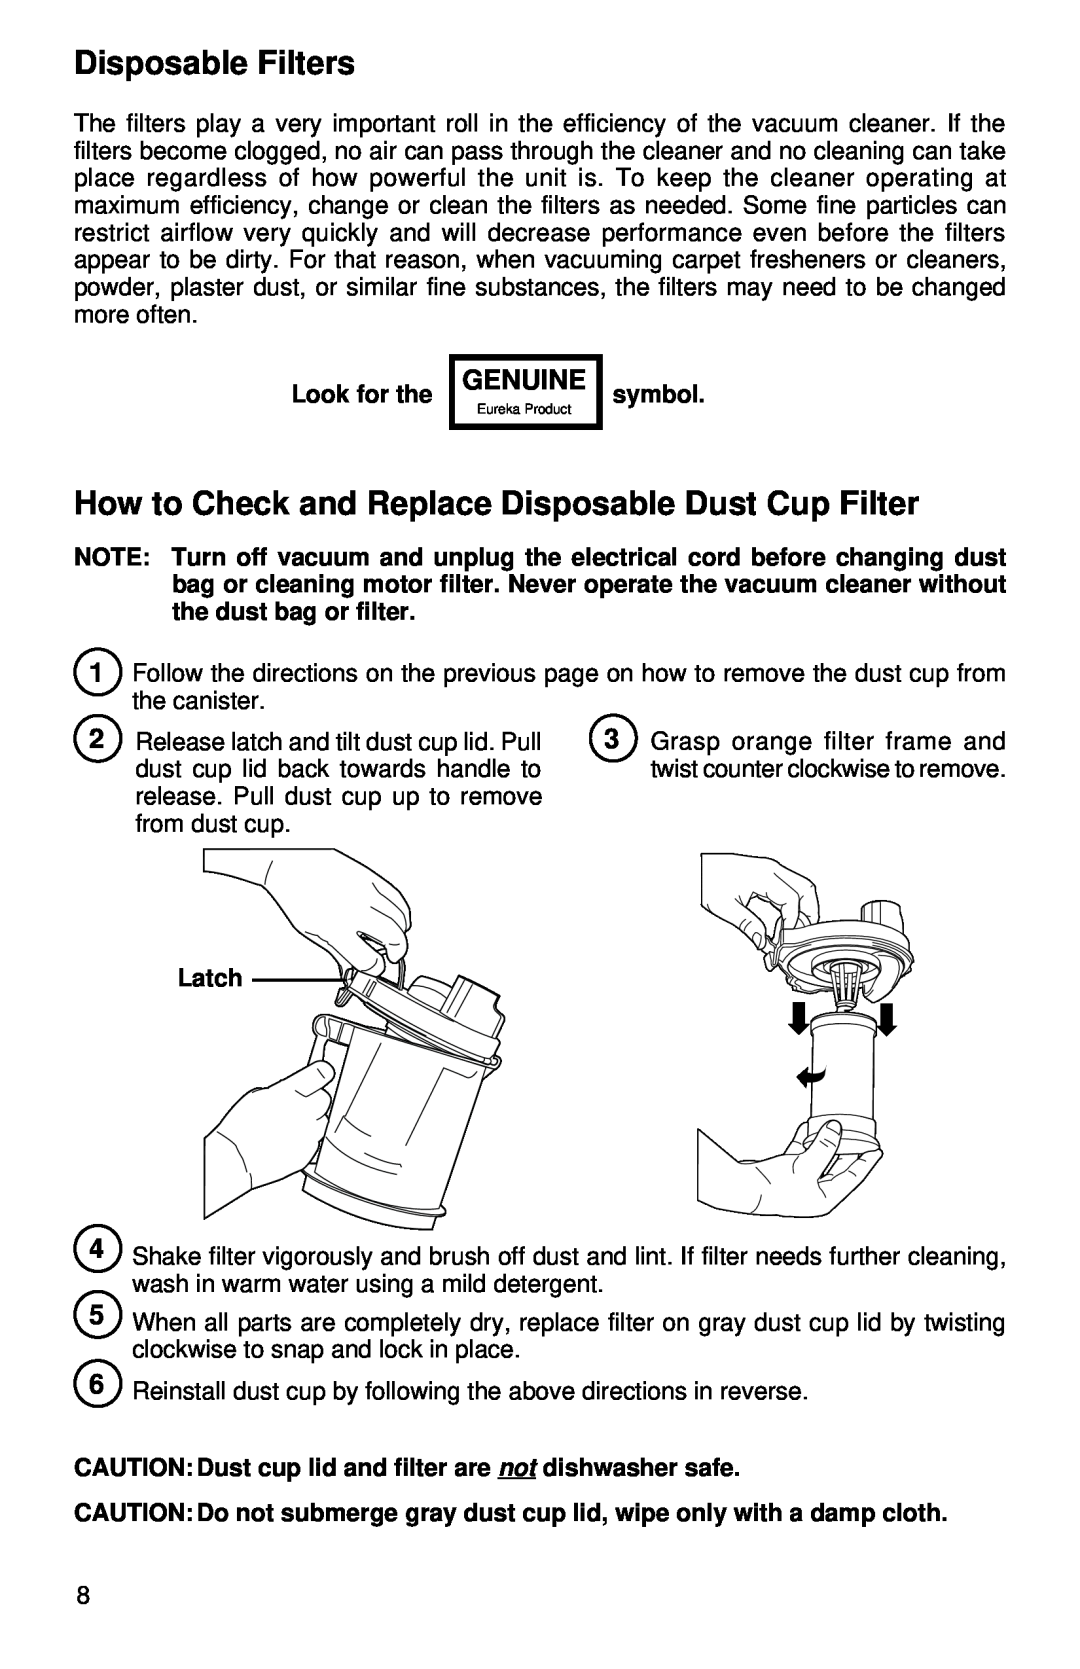 Eureka 3690 warranty Disposable Filters, How to Check and Replace Disposable Dust Cup Filter, Genuine 